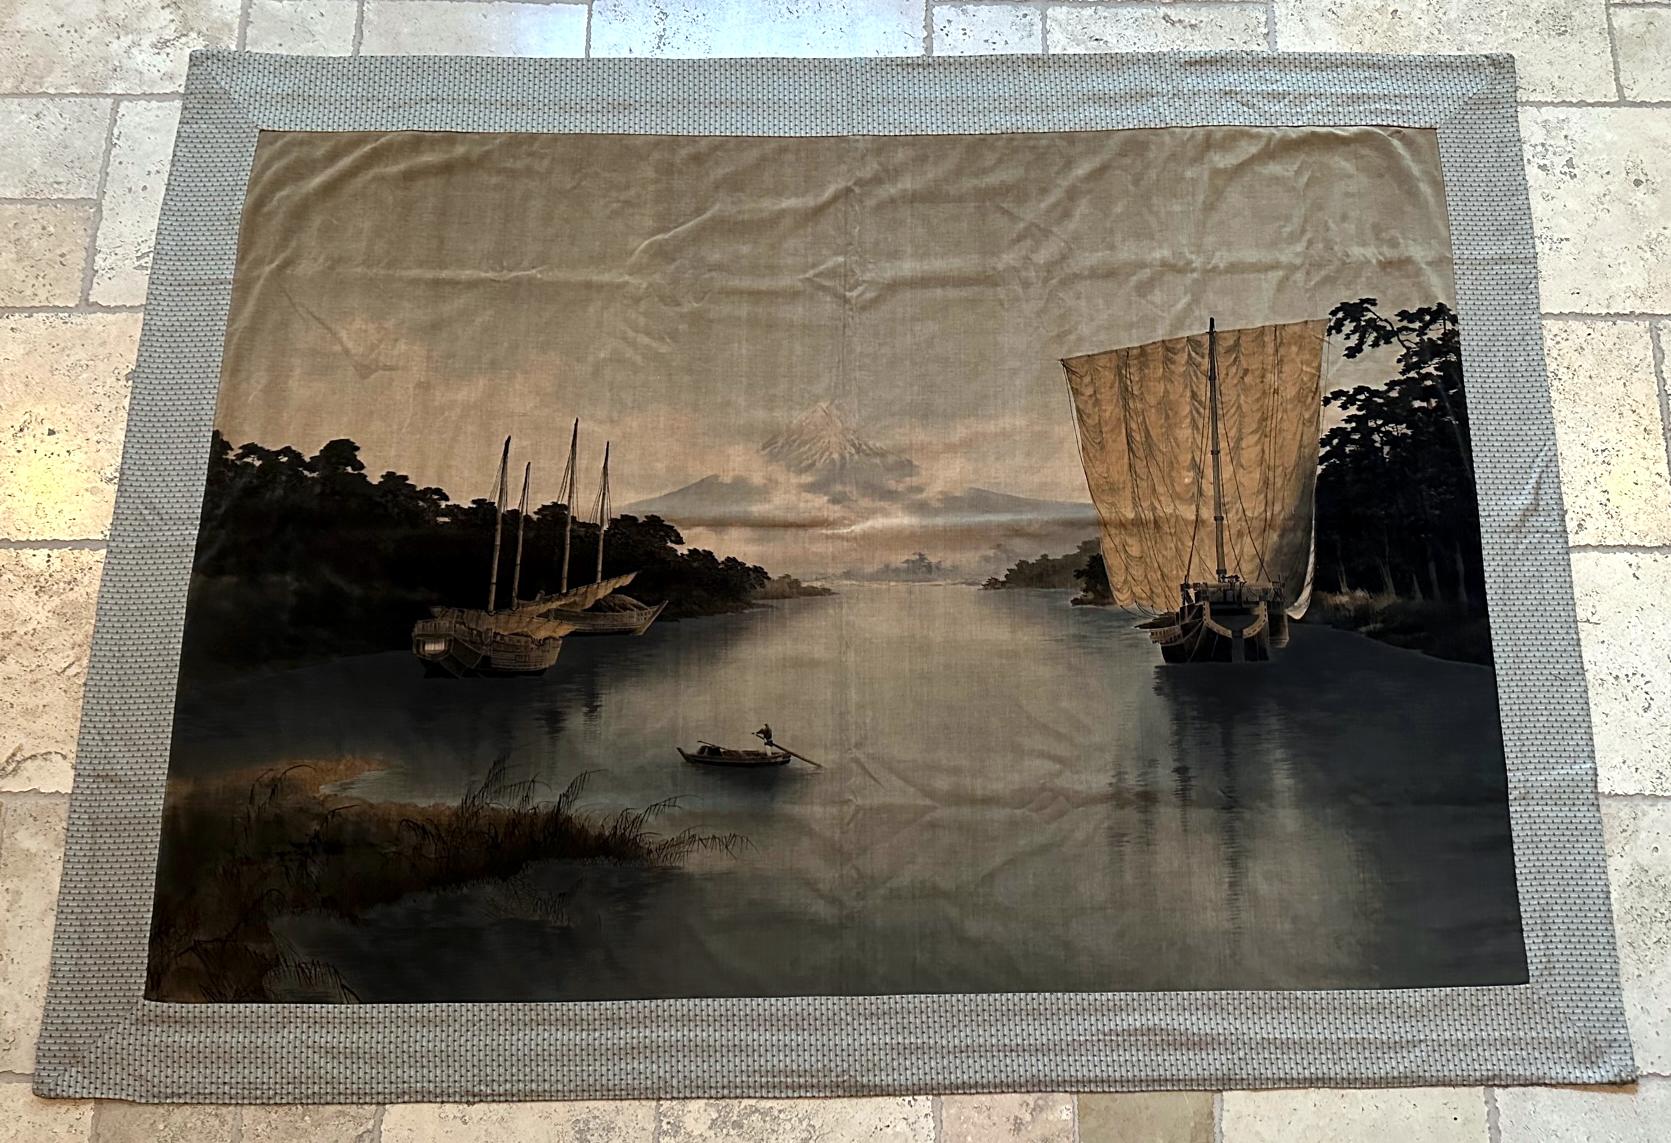 A large Japanese wall-hanging tapestry made from resistant dye painted cut and uncut velvet (the technique is known as yūzen birodo in Japanese). The tapestry is dated to late Meiji period (circa 1900-1920s) and likely a piece made for exposition in